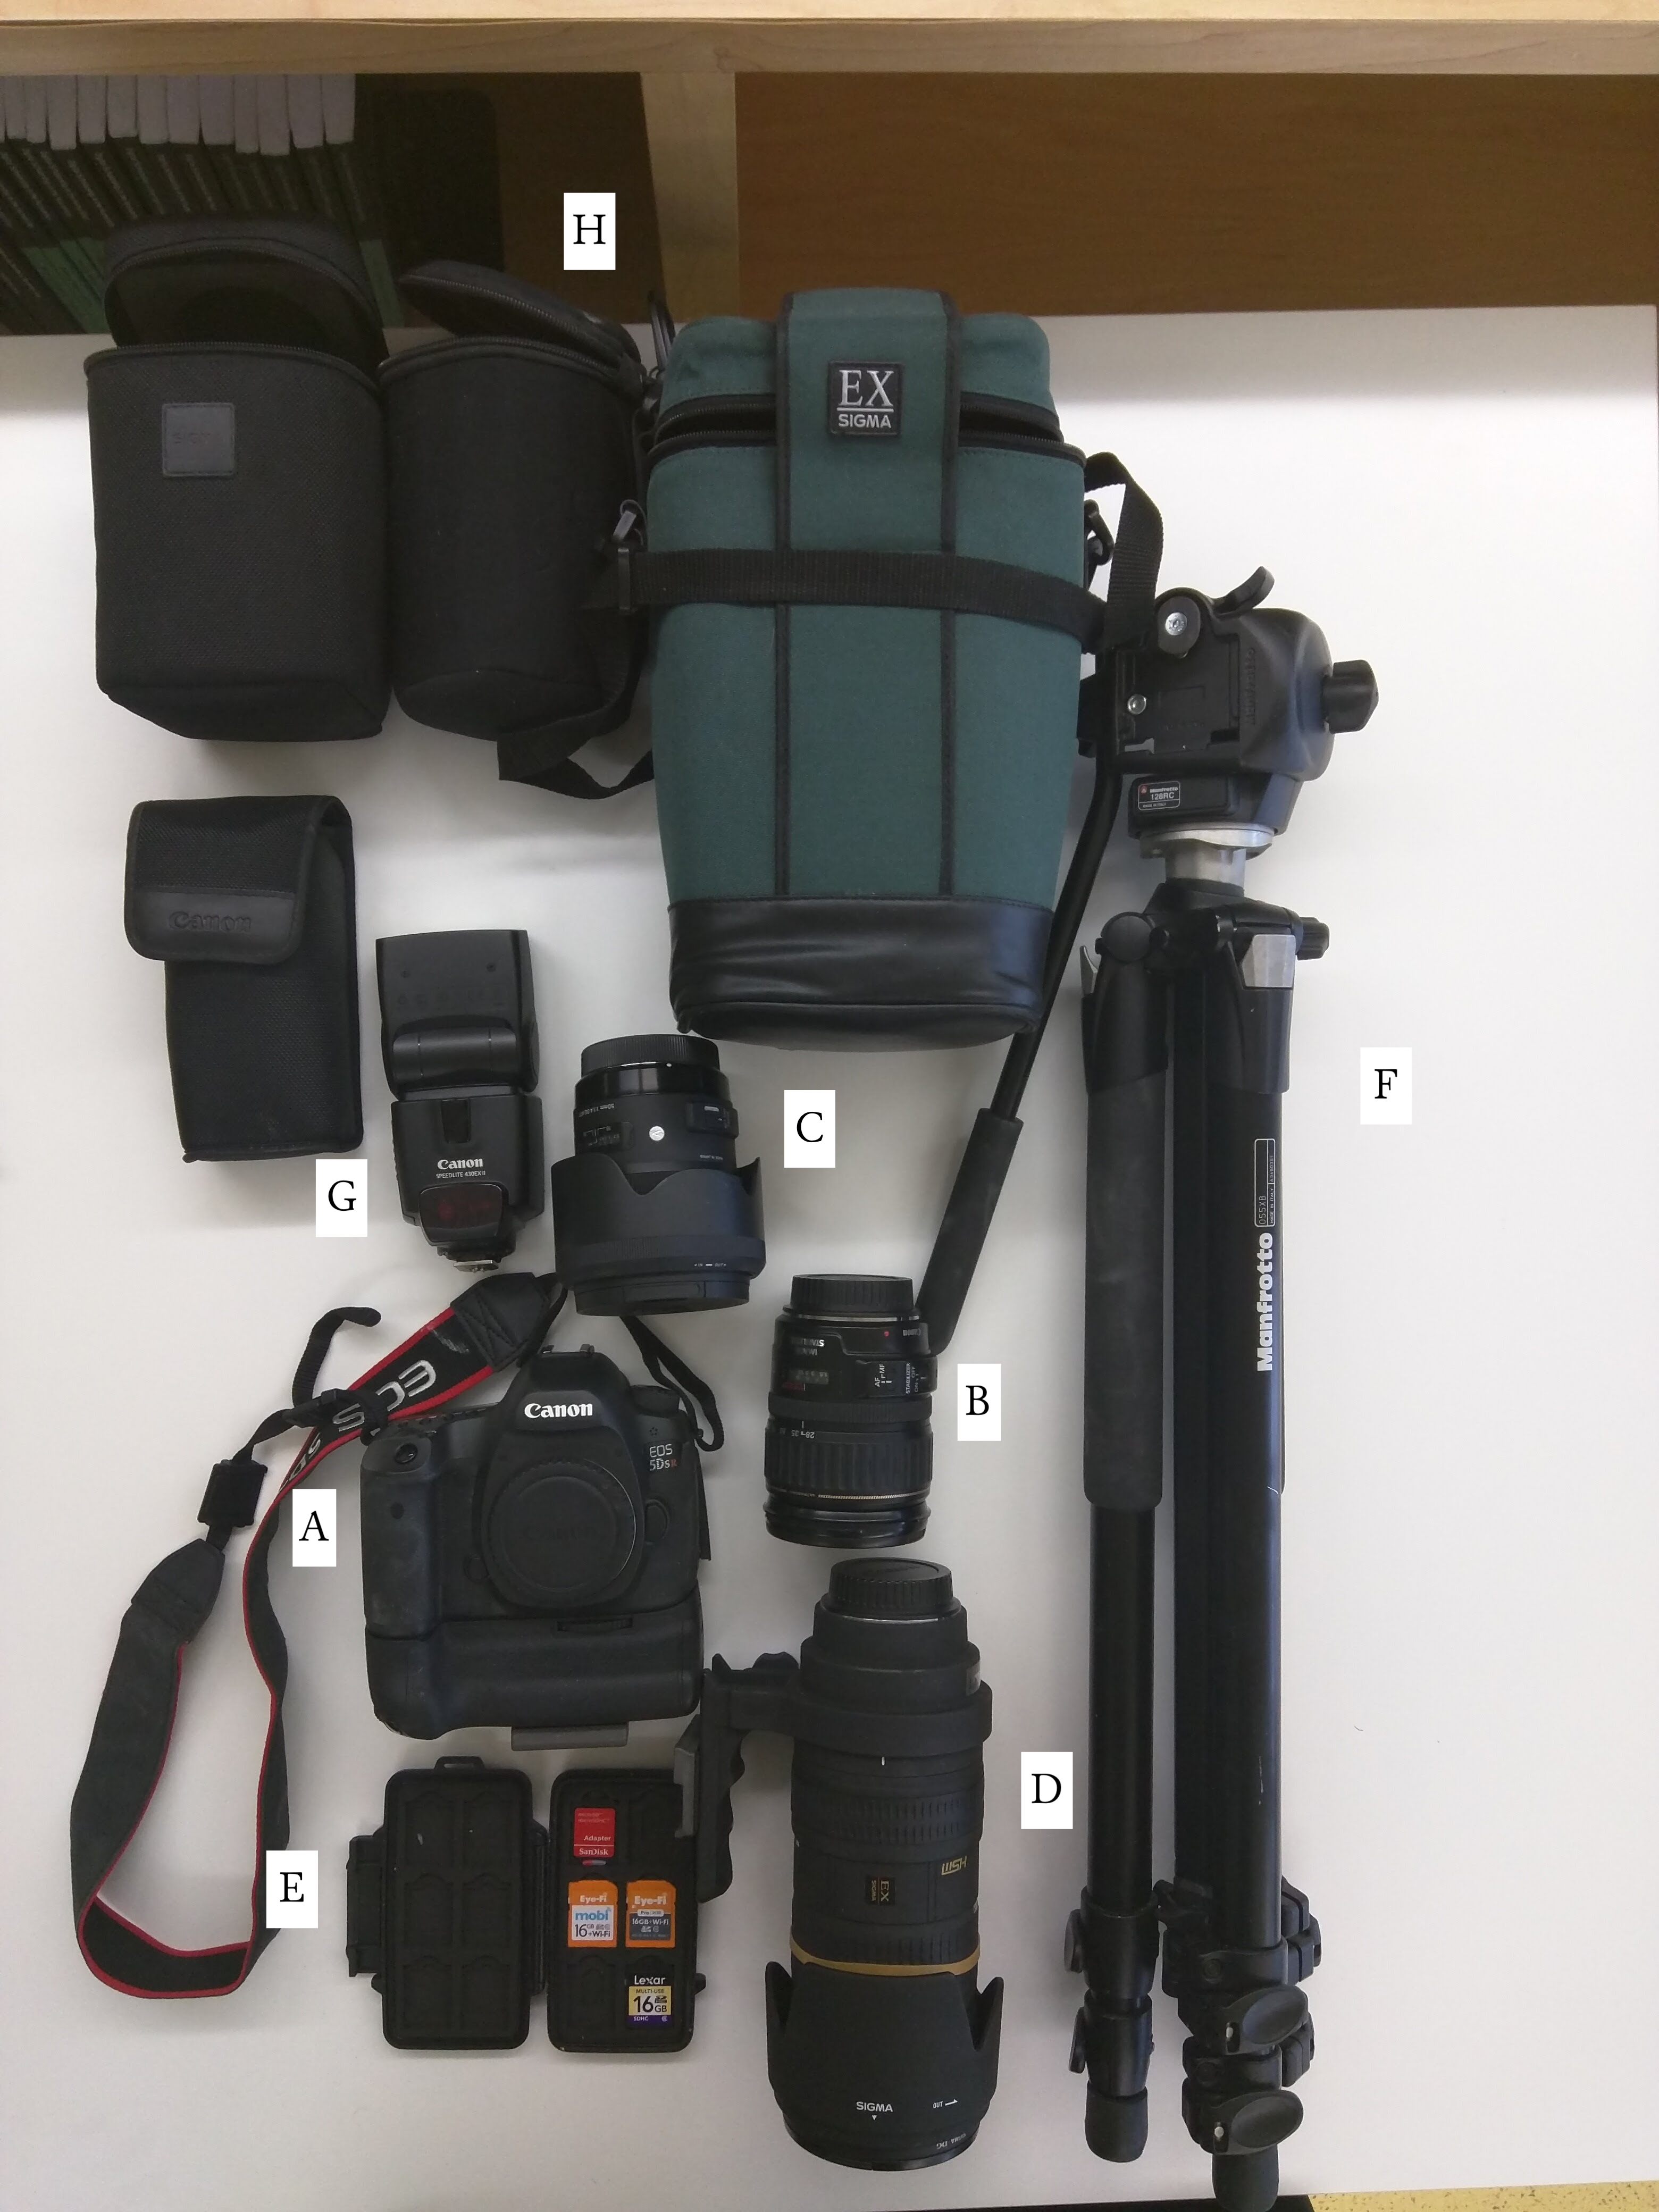 a picture of a camera, several lenses, some SD cards, a tripod, and a flash.